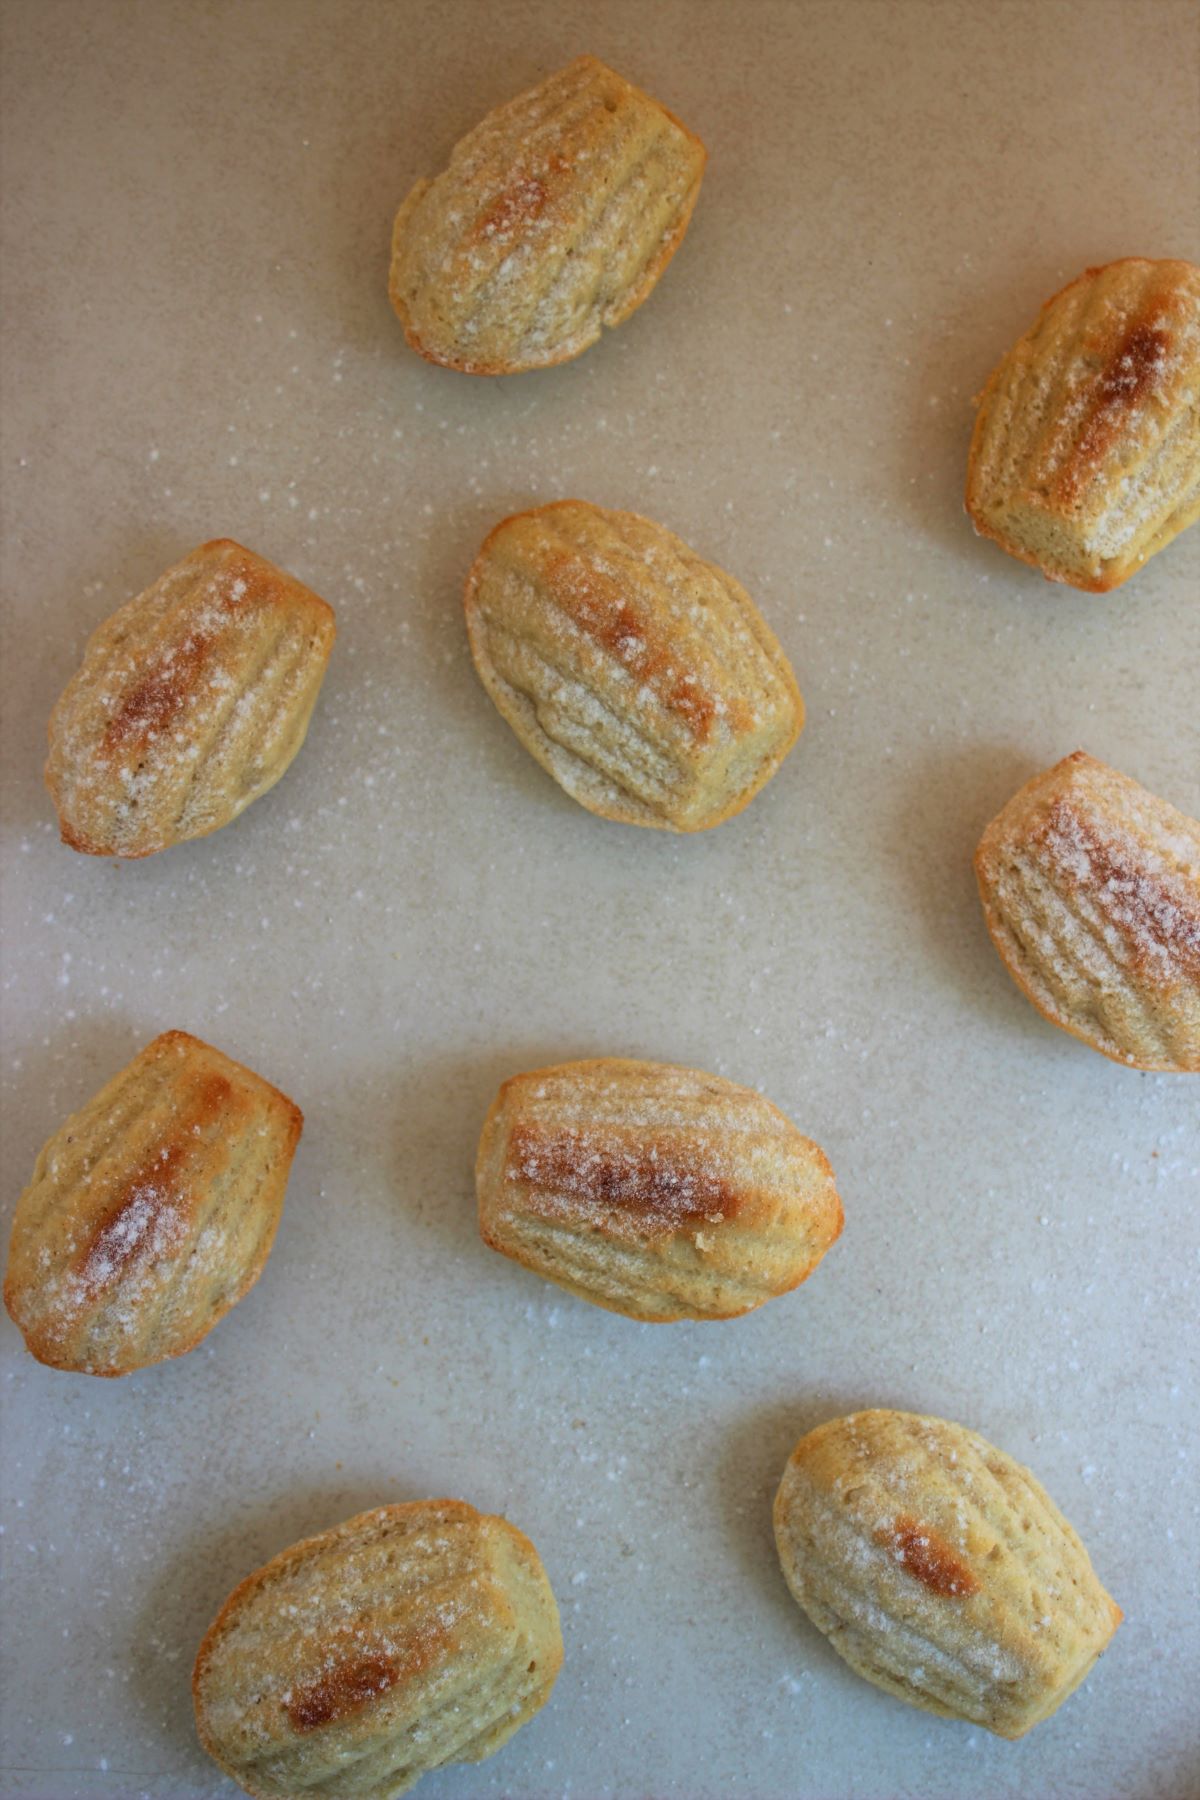 Many madeleines on a white surface.